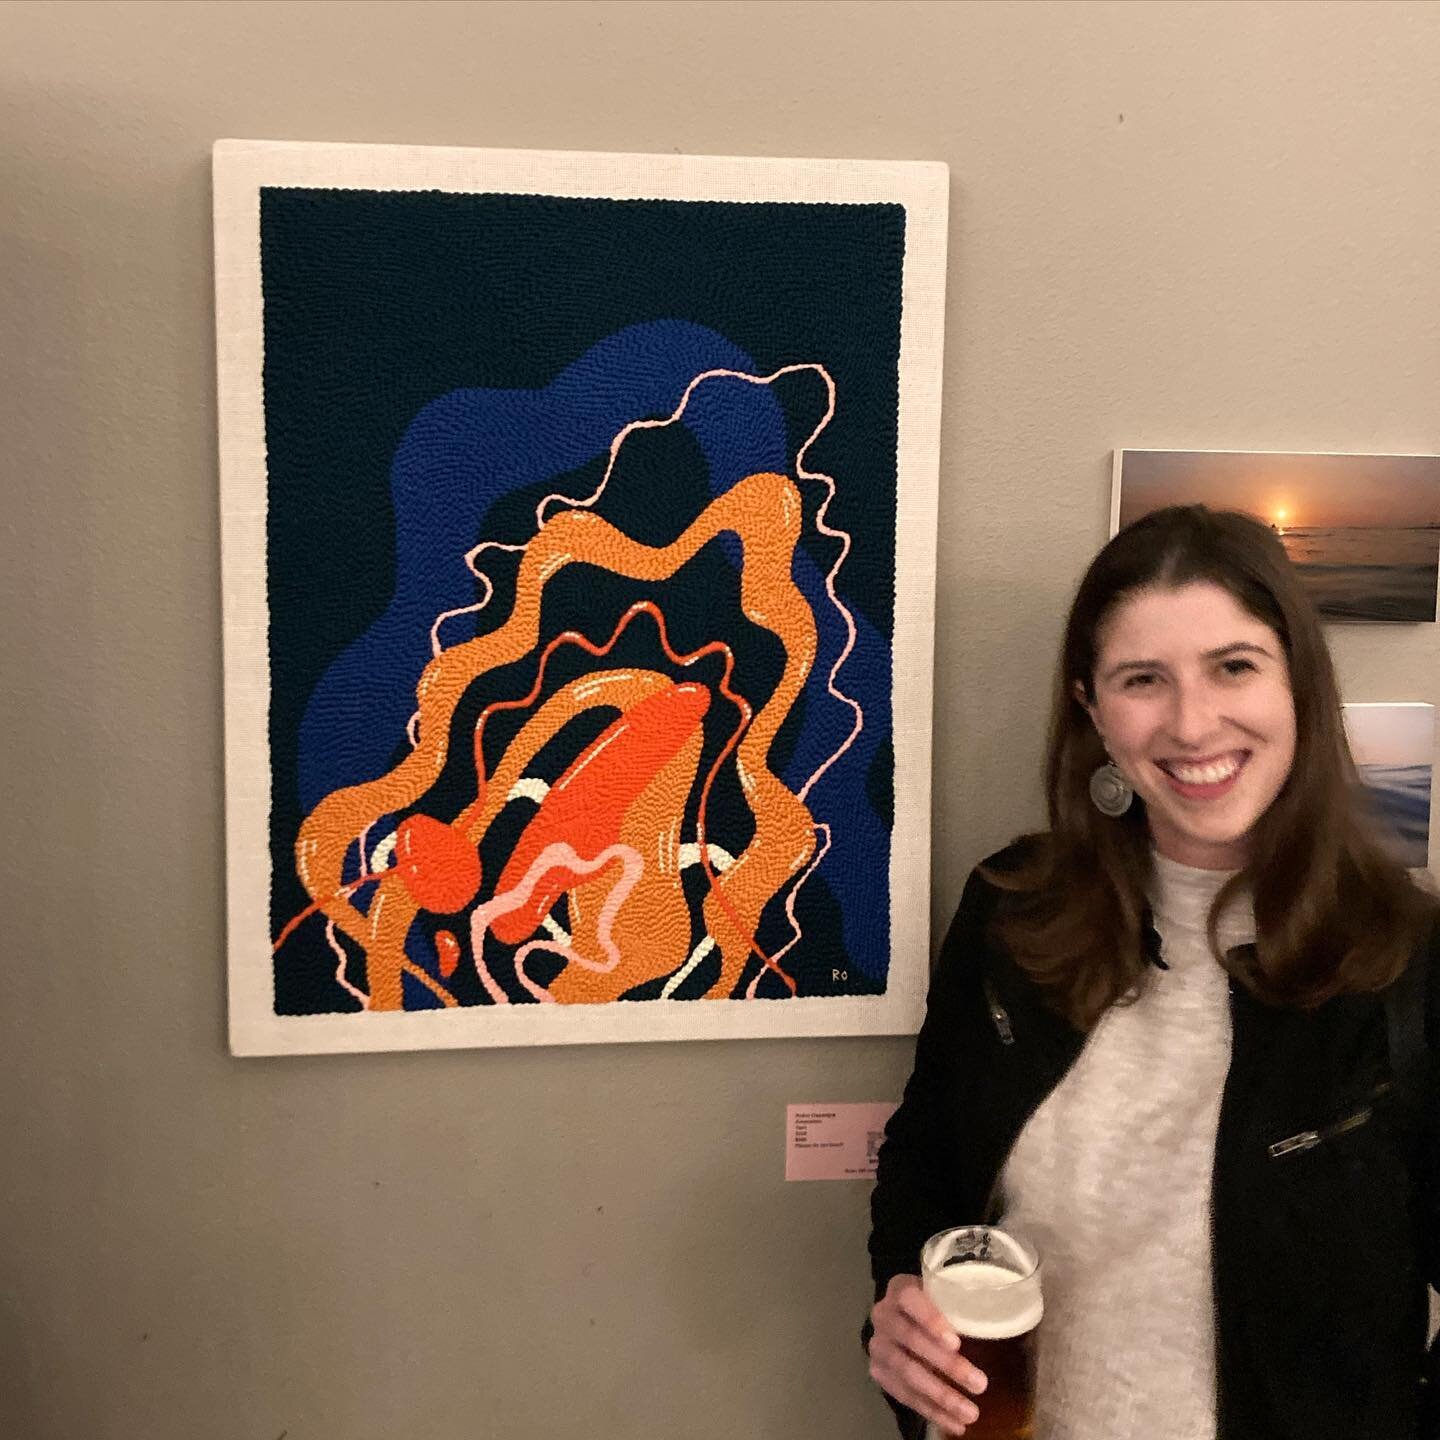 Had a blast at the @topatopabrewingco Artists in Residence opening last night! Huge thanks to @alysestuck for putting together a great show 🍻
These two pieces will be up until April so go check them out!

#topatopa #artistsinresidence #ventura #loca